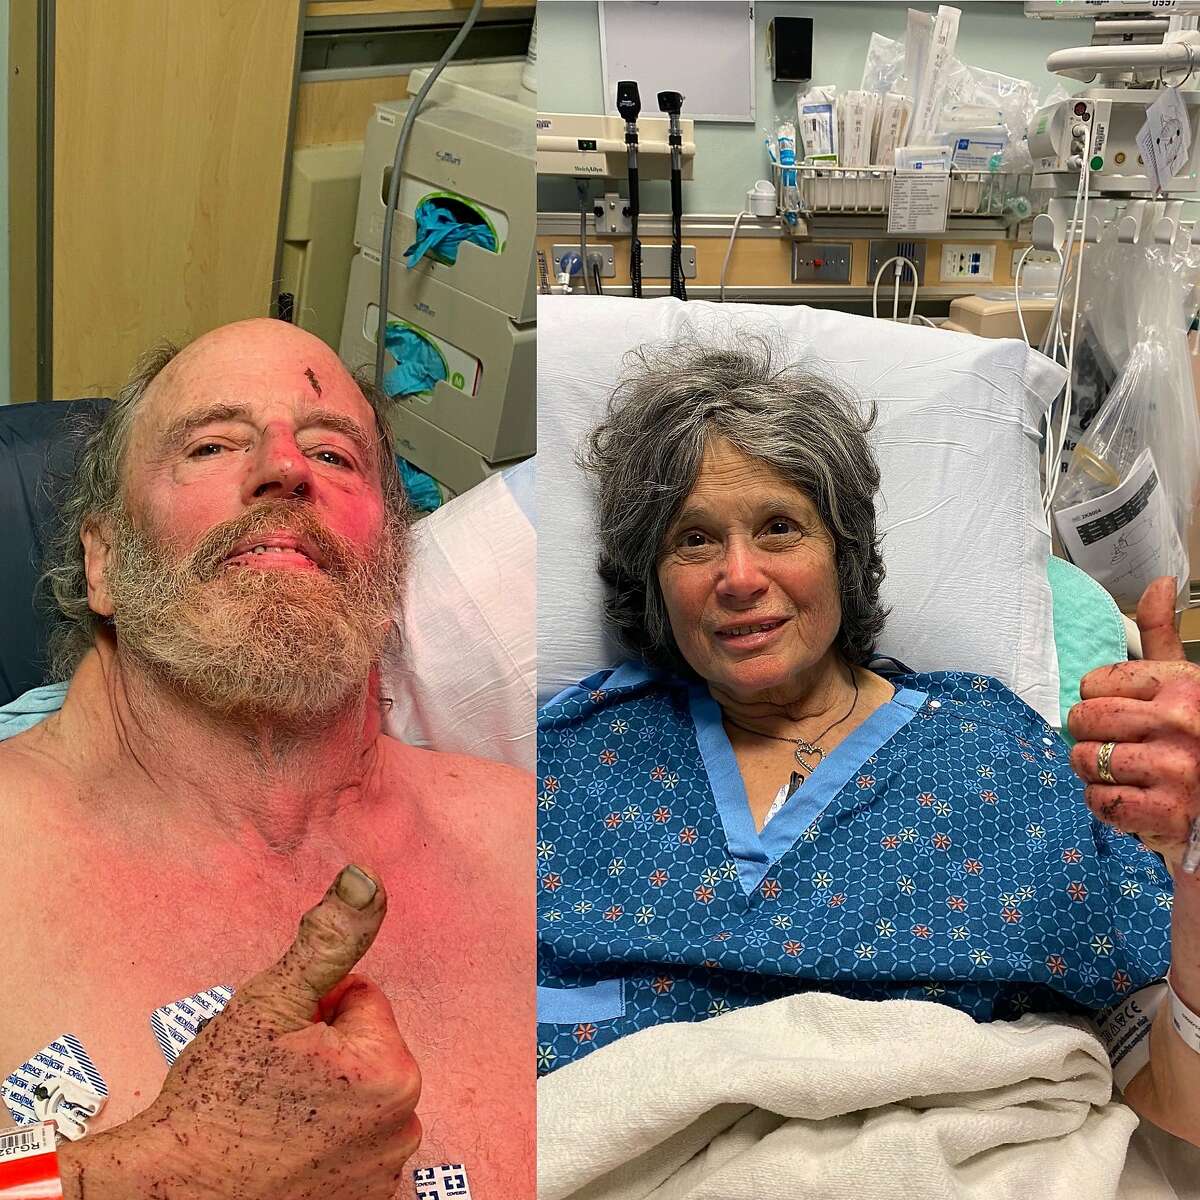 Ian Irwin and Carol Kiparsky were recovering at a local hospital on Saturday, Feb. 22, after having gone missing while on a Valentine's Day hike near their rental home in Inverness. The couple was found by searchers Saturday morning.